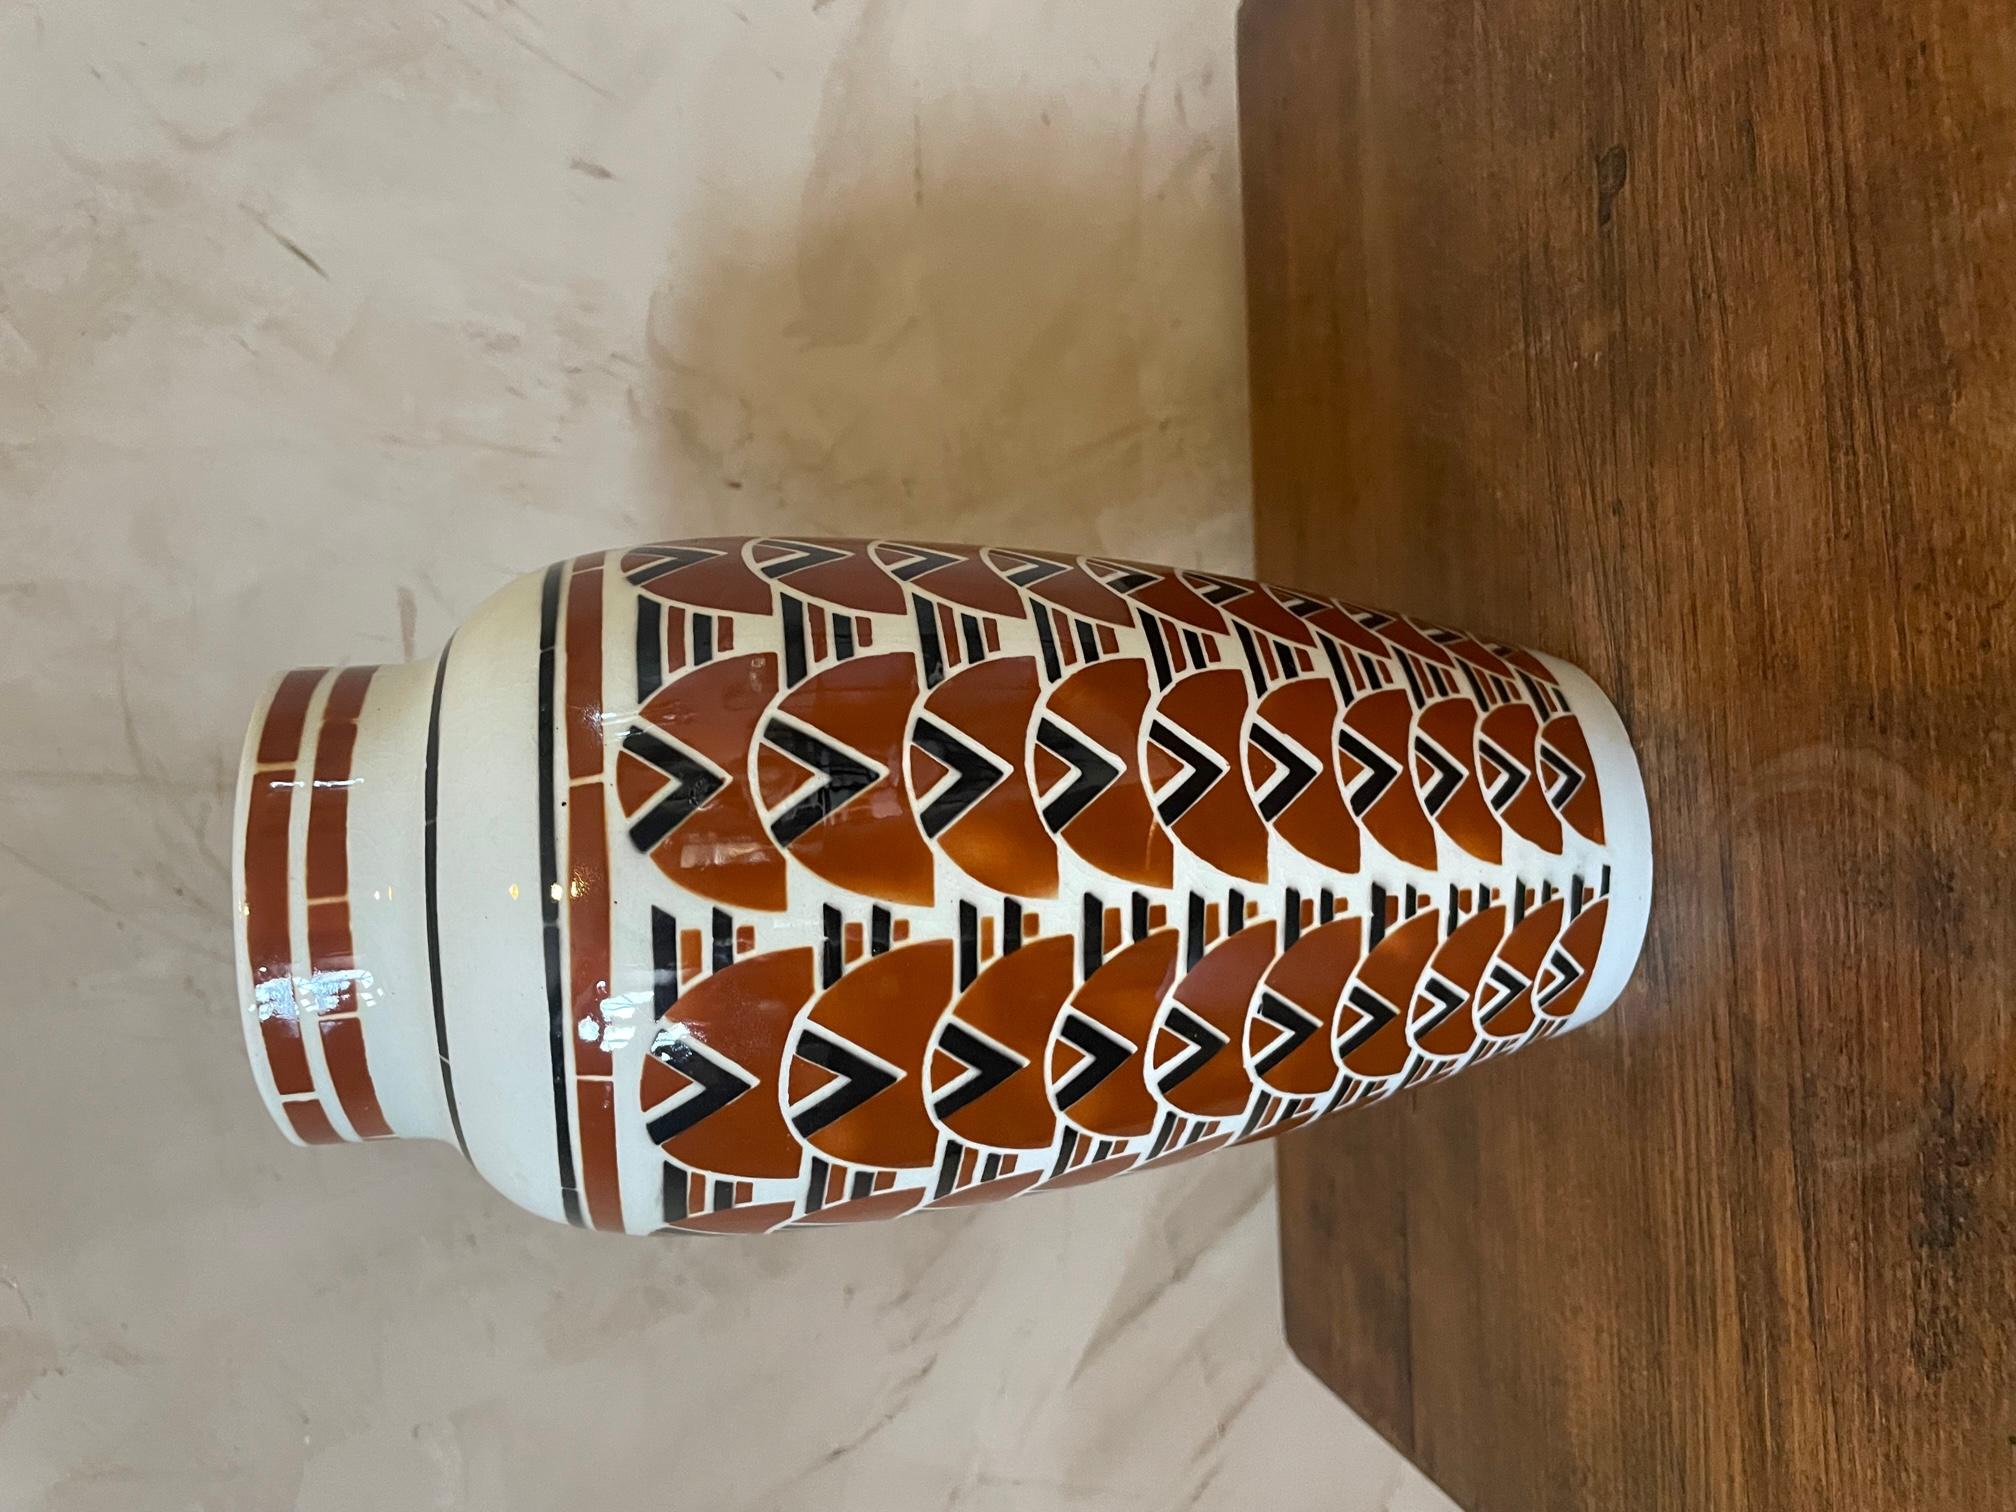 Beautiful art deco vase in Luneville earthenware signed Keller Guerin below. Pattern typical of the 1930s. Black and terracotta color.
Nice quality.